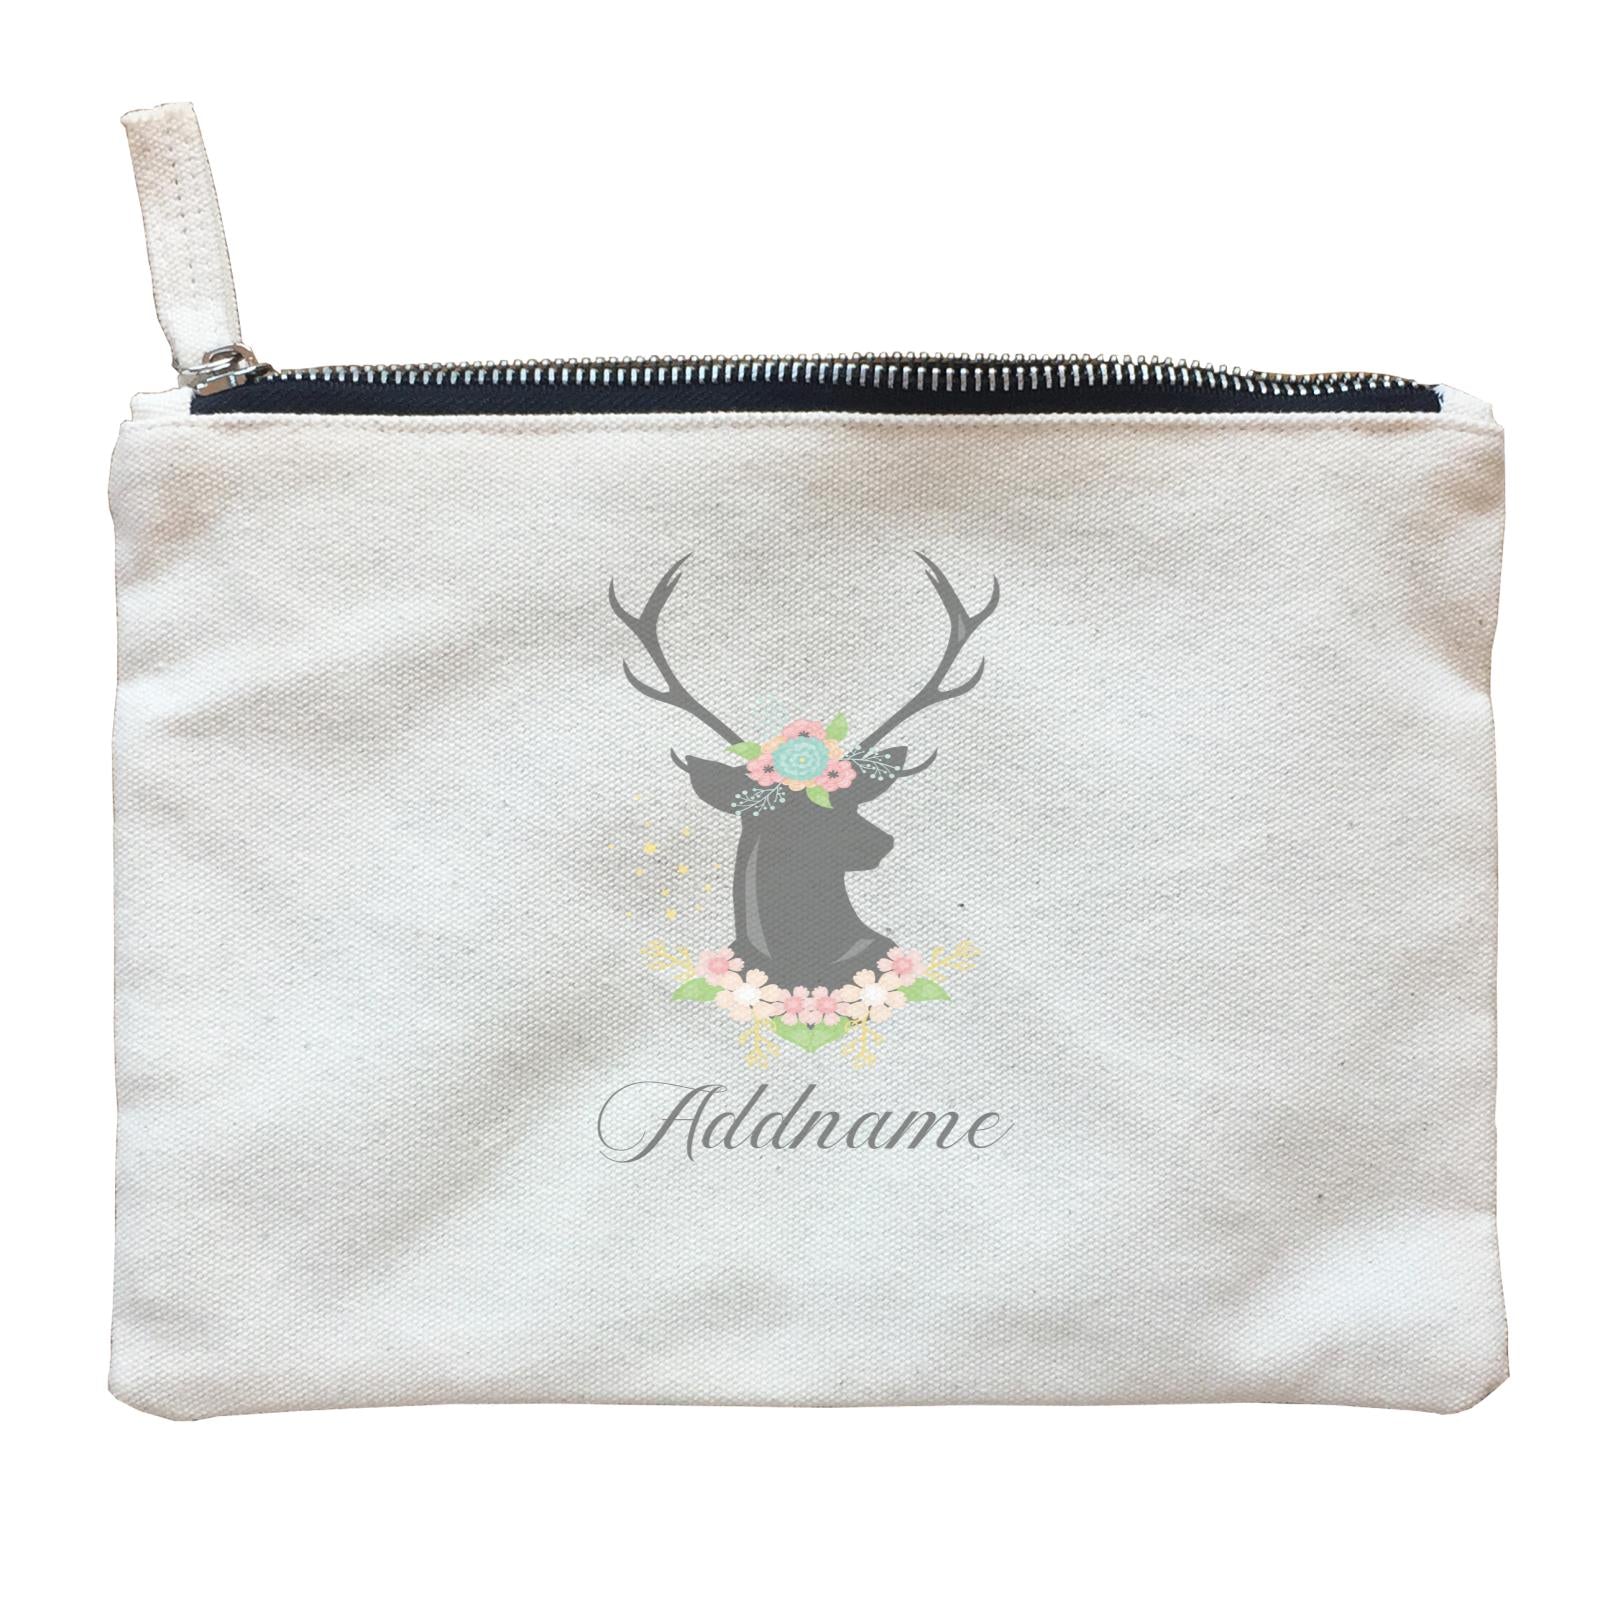 Basic Family Series Pastel Deer Black Deer With Flower Addname Zipper Pouch